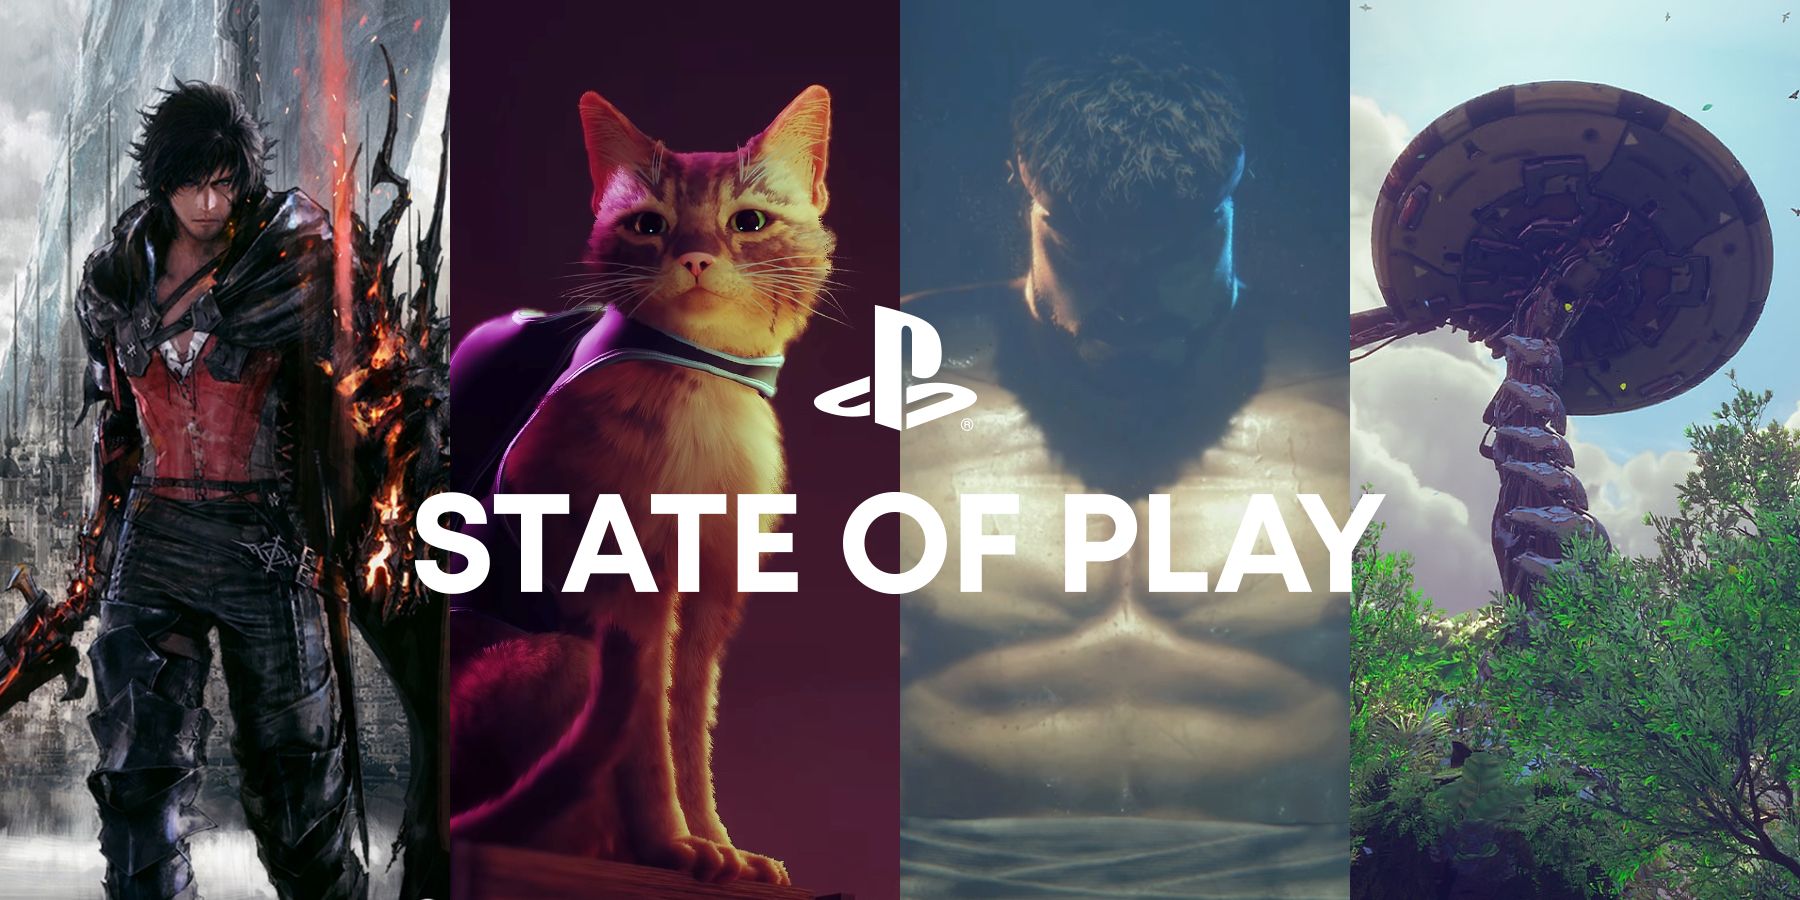 Details on where to watch PlayStation's June 2 State of Play, and what games might be featured